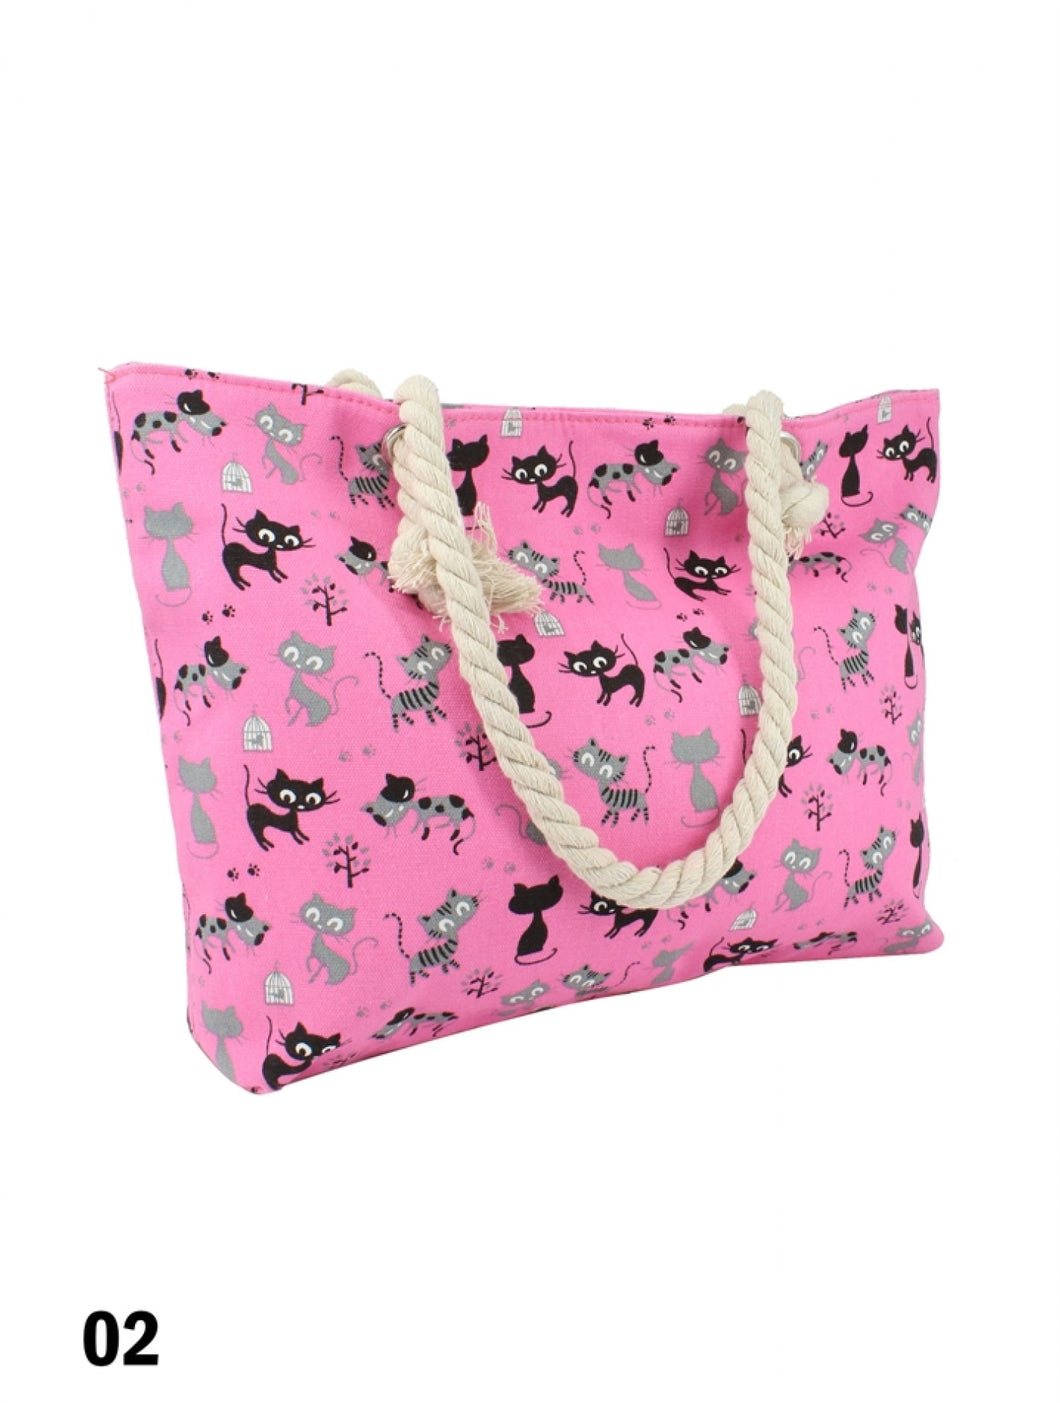 Sac fourre-tout - Chats roses